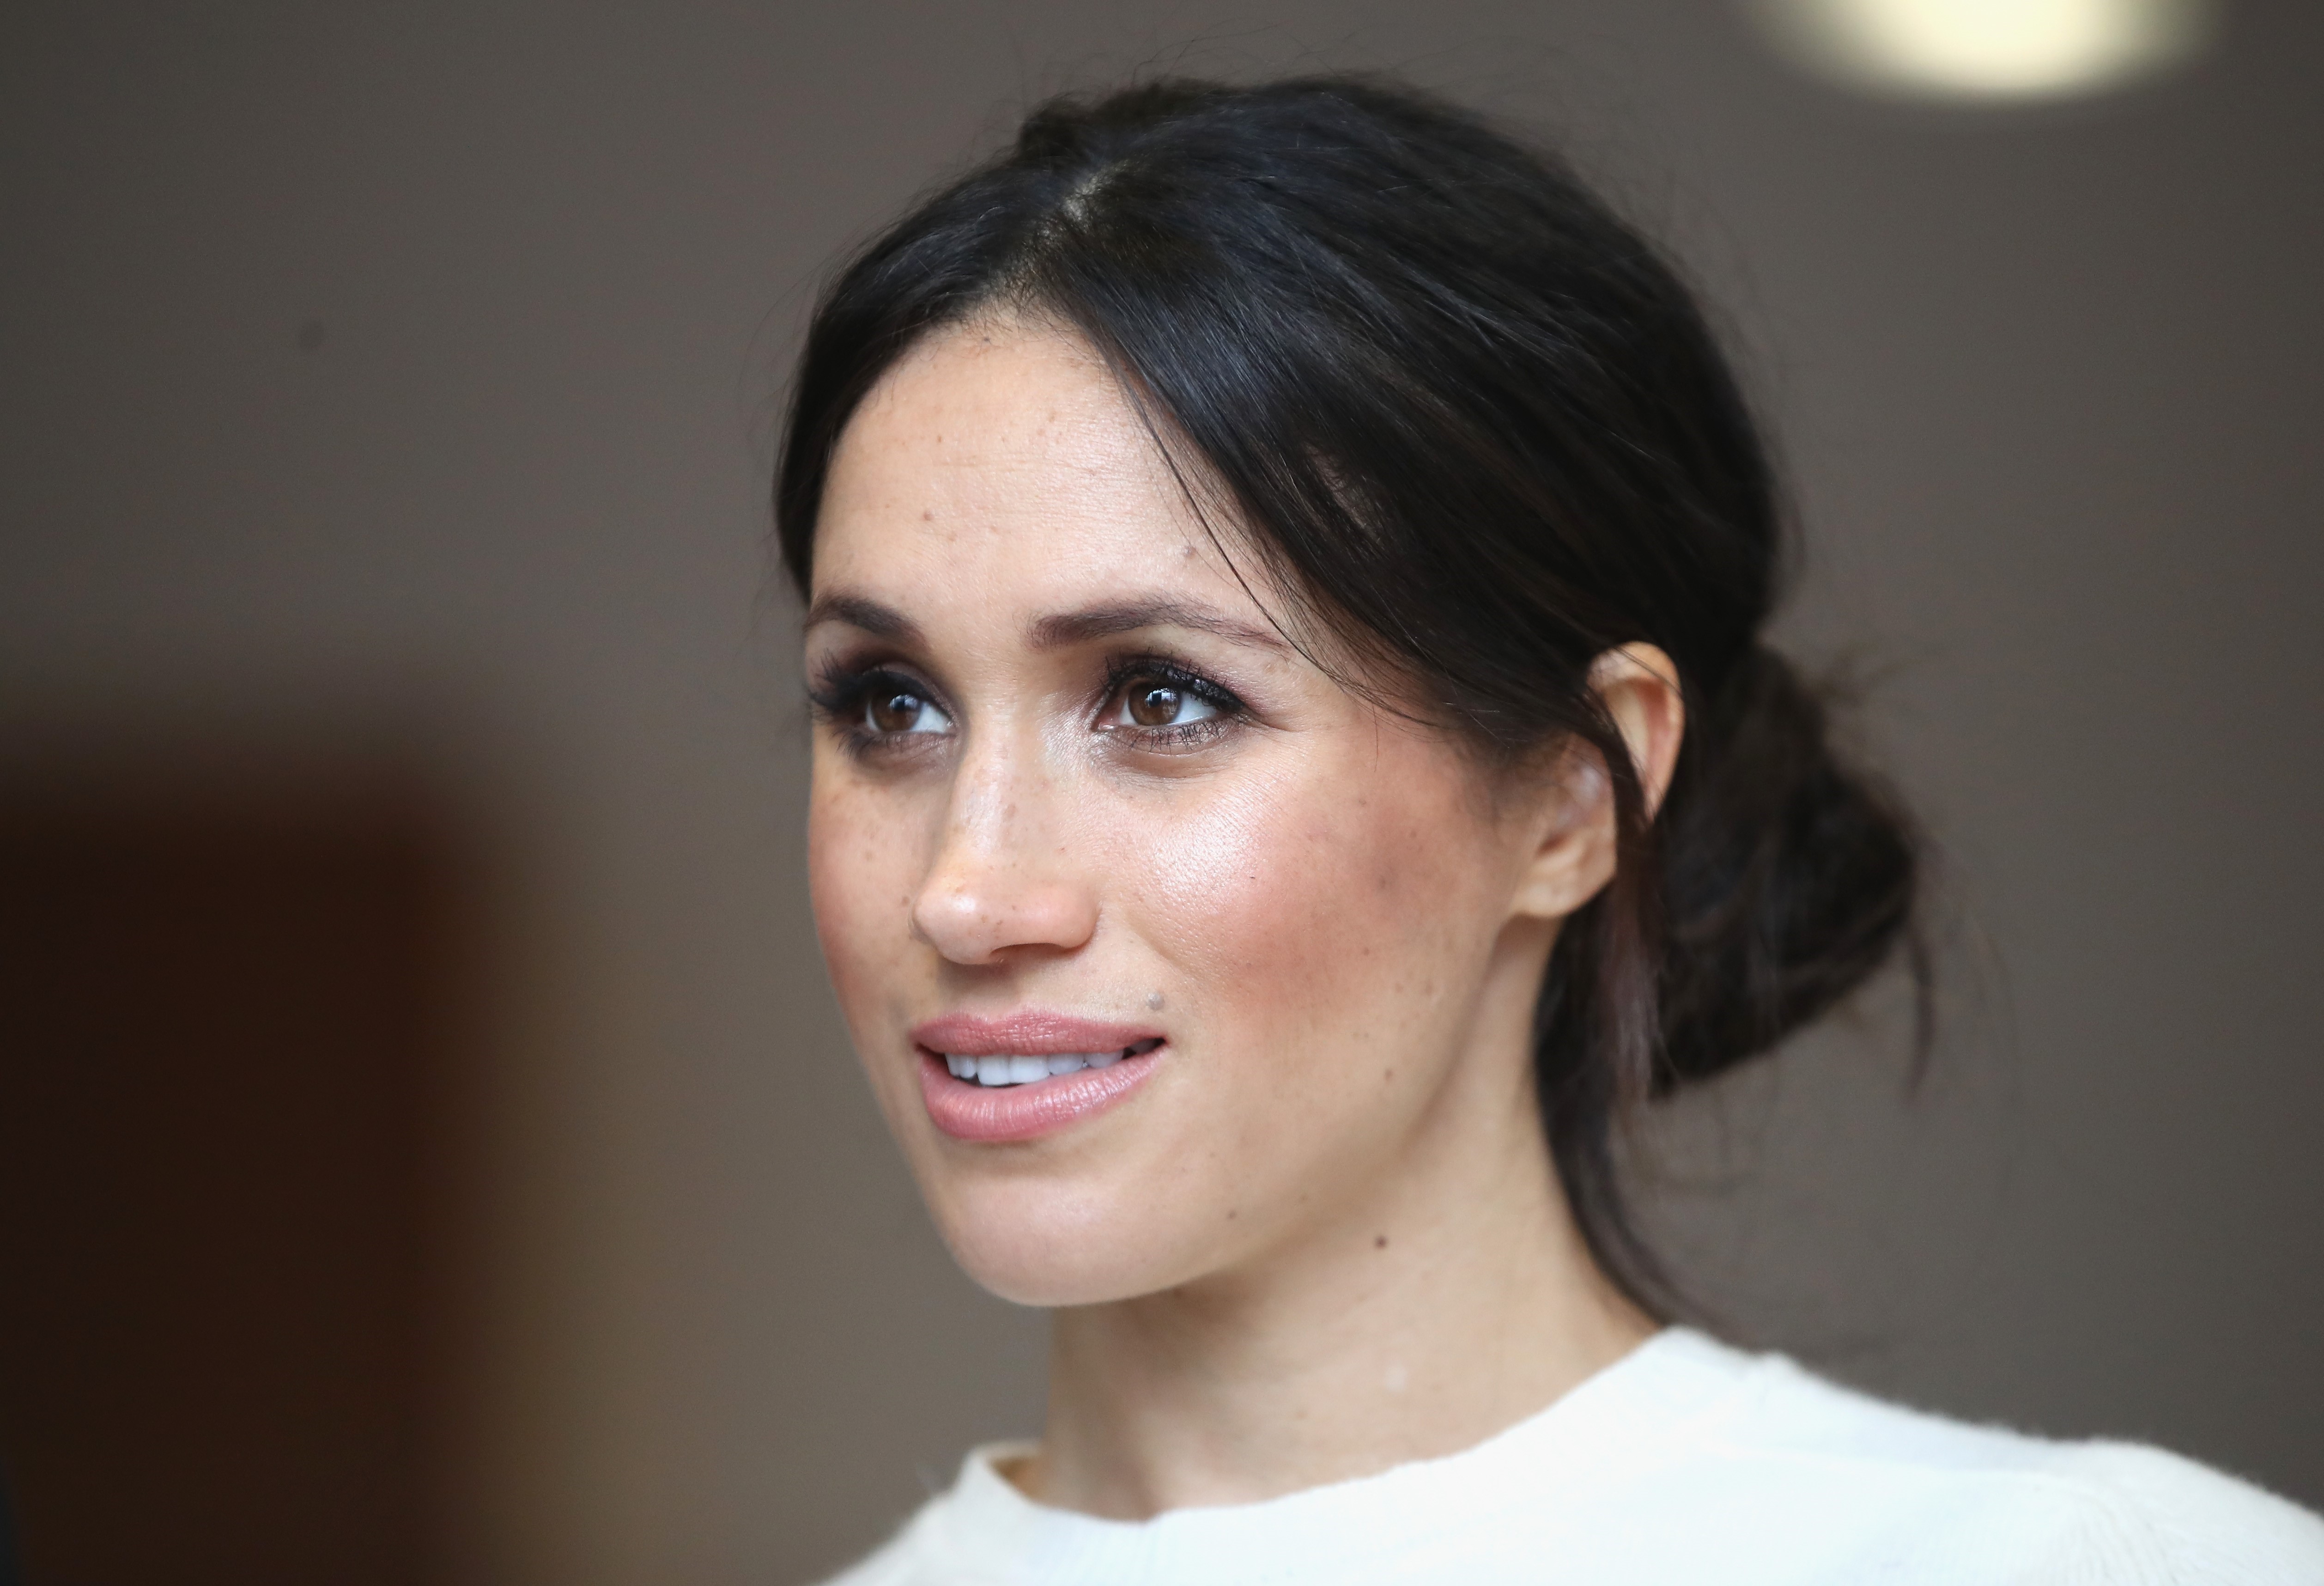 Headshot of Meghan Markle during a visit to Catalyst Inc in Northern Ireland